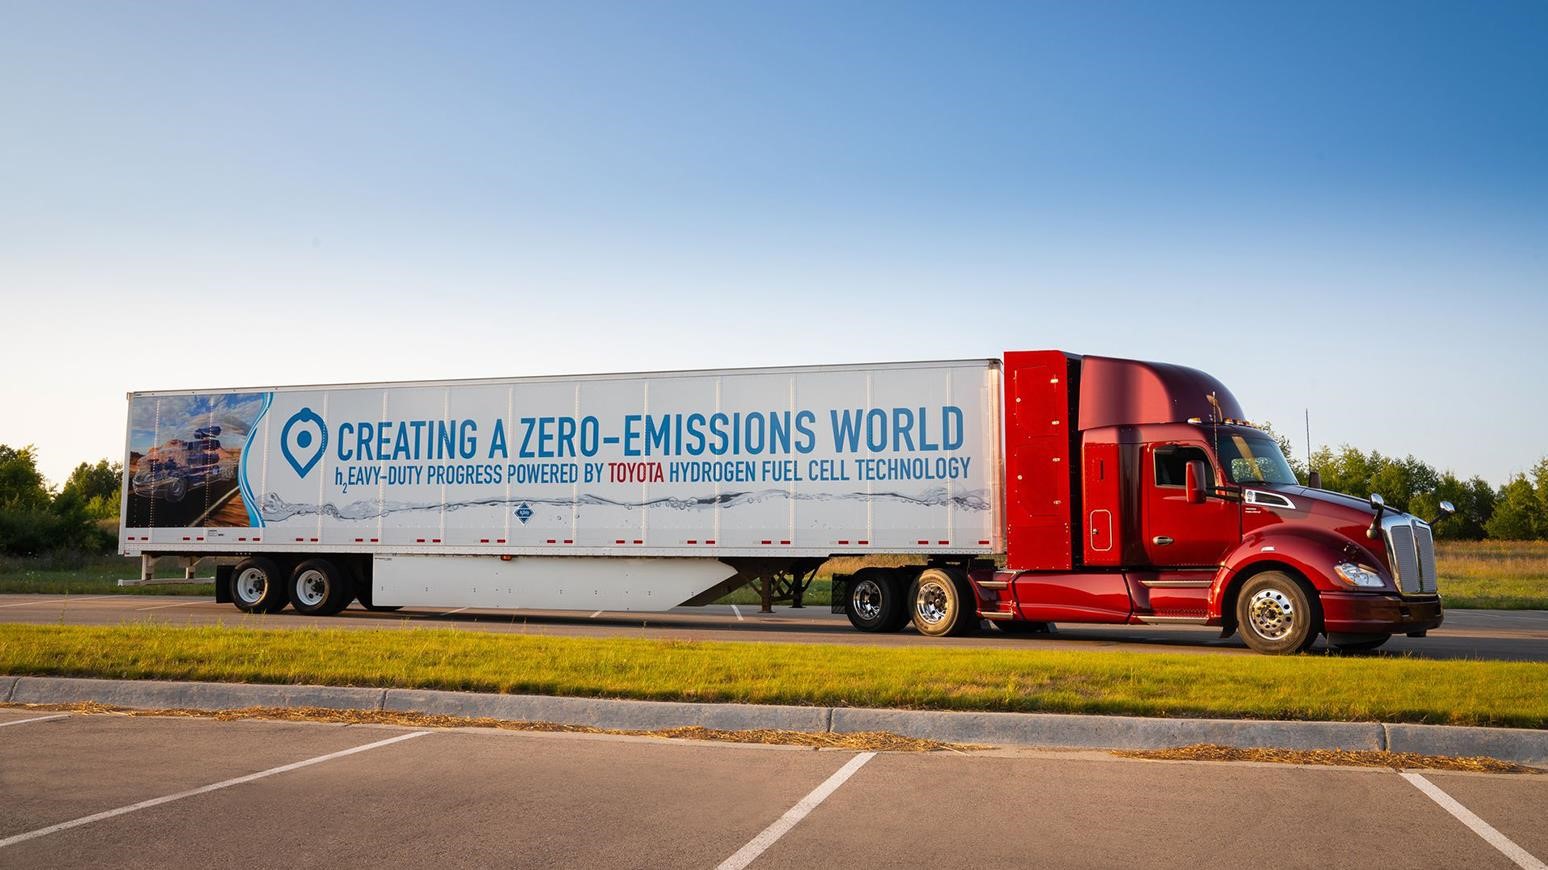 PACCAR Showcases Hydrogen Fuel Cell & Electric Trucks At CES 2019